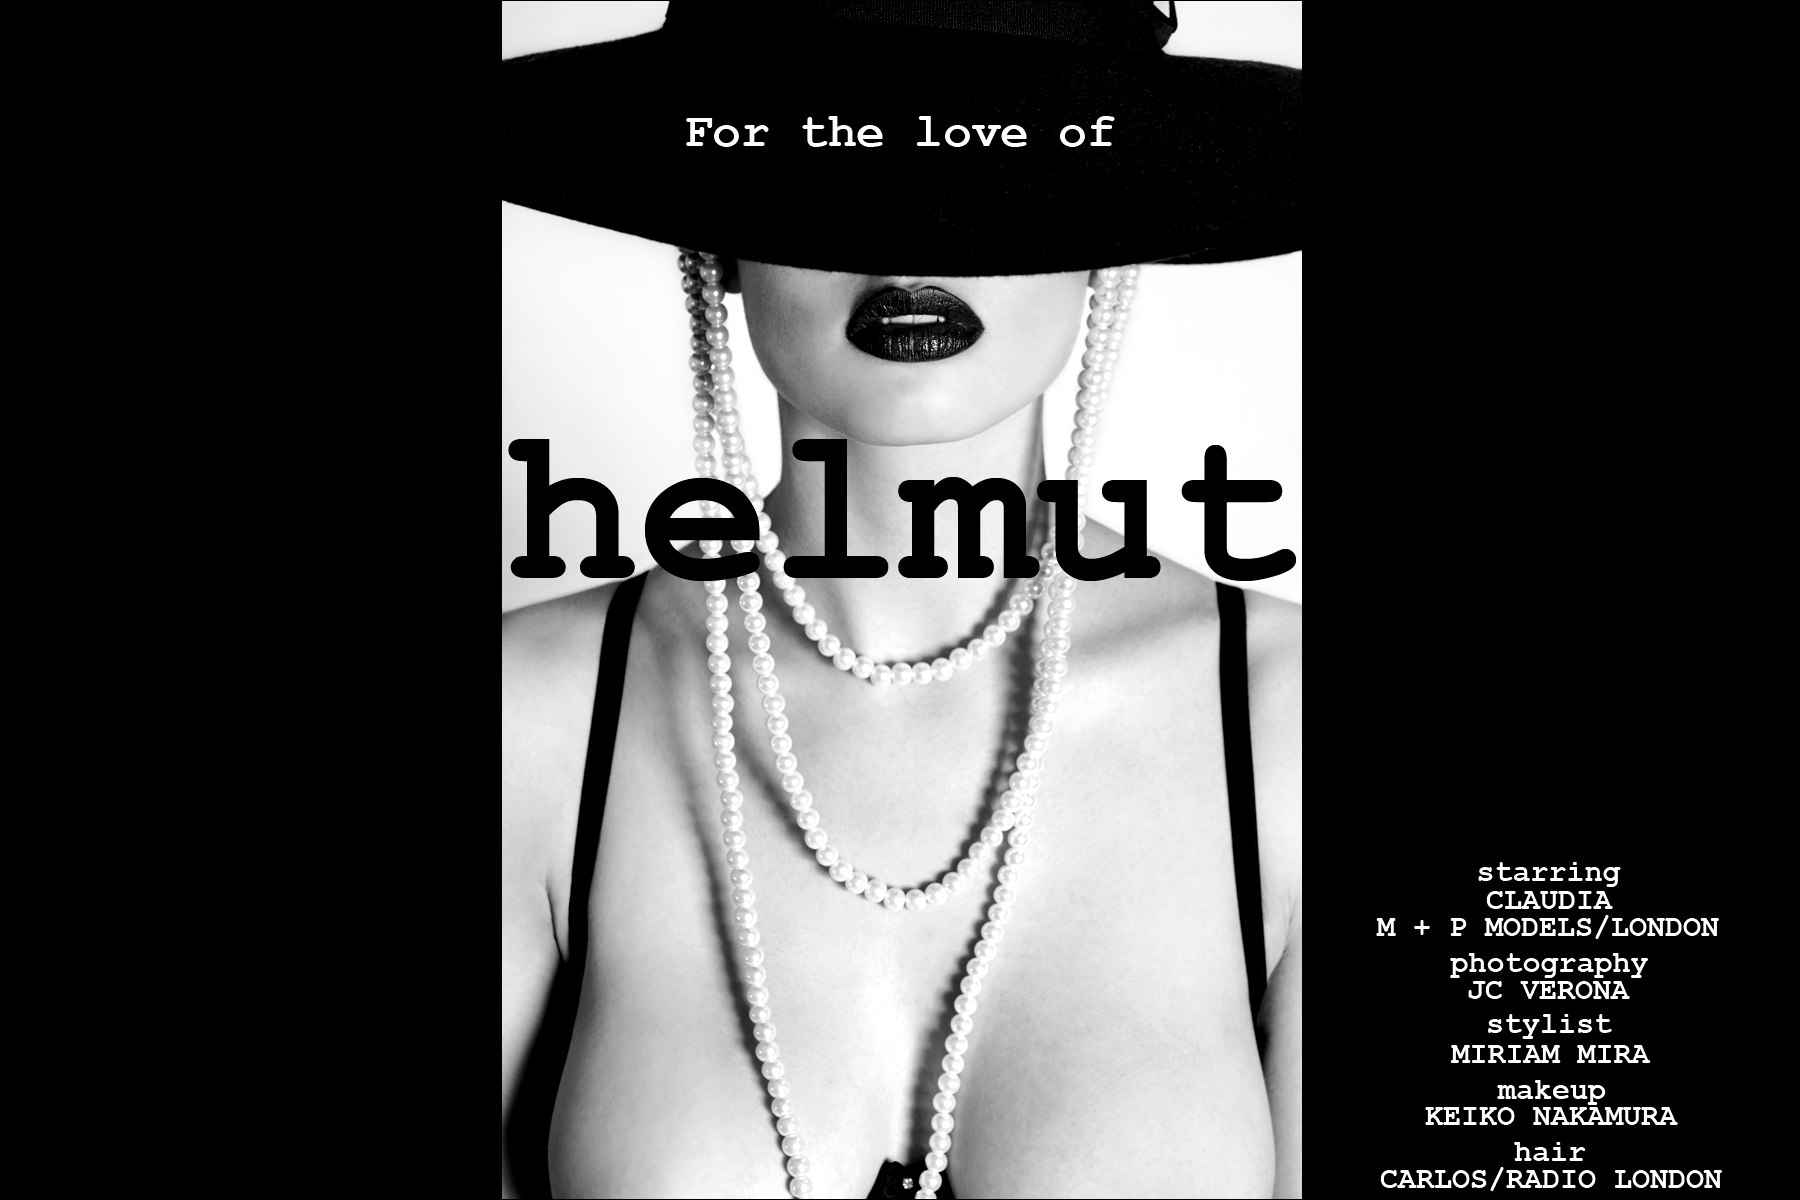 "For the love of Helmut", a women's editorial photographed by UK based photographer JC Verona for Ponyboy Magazine.